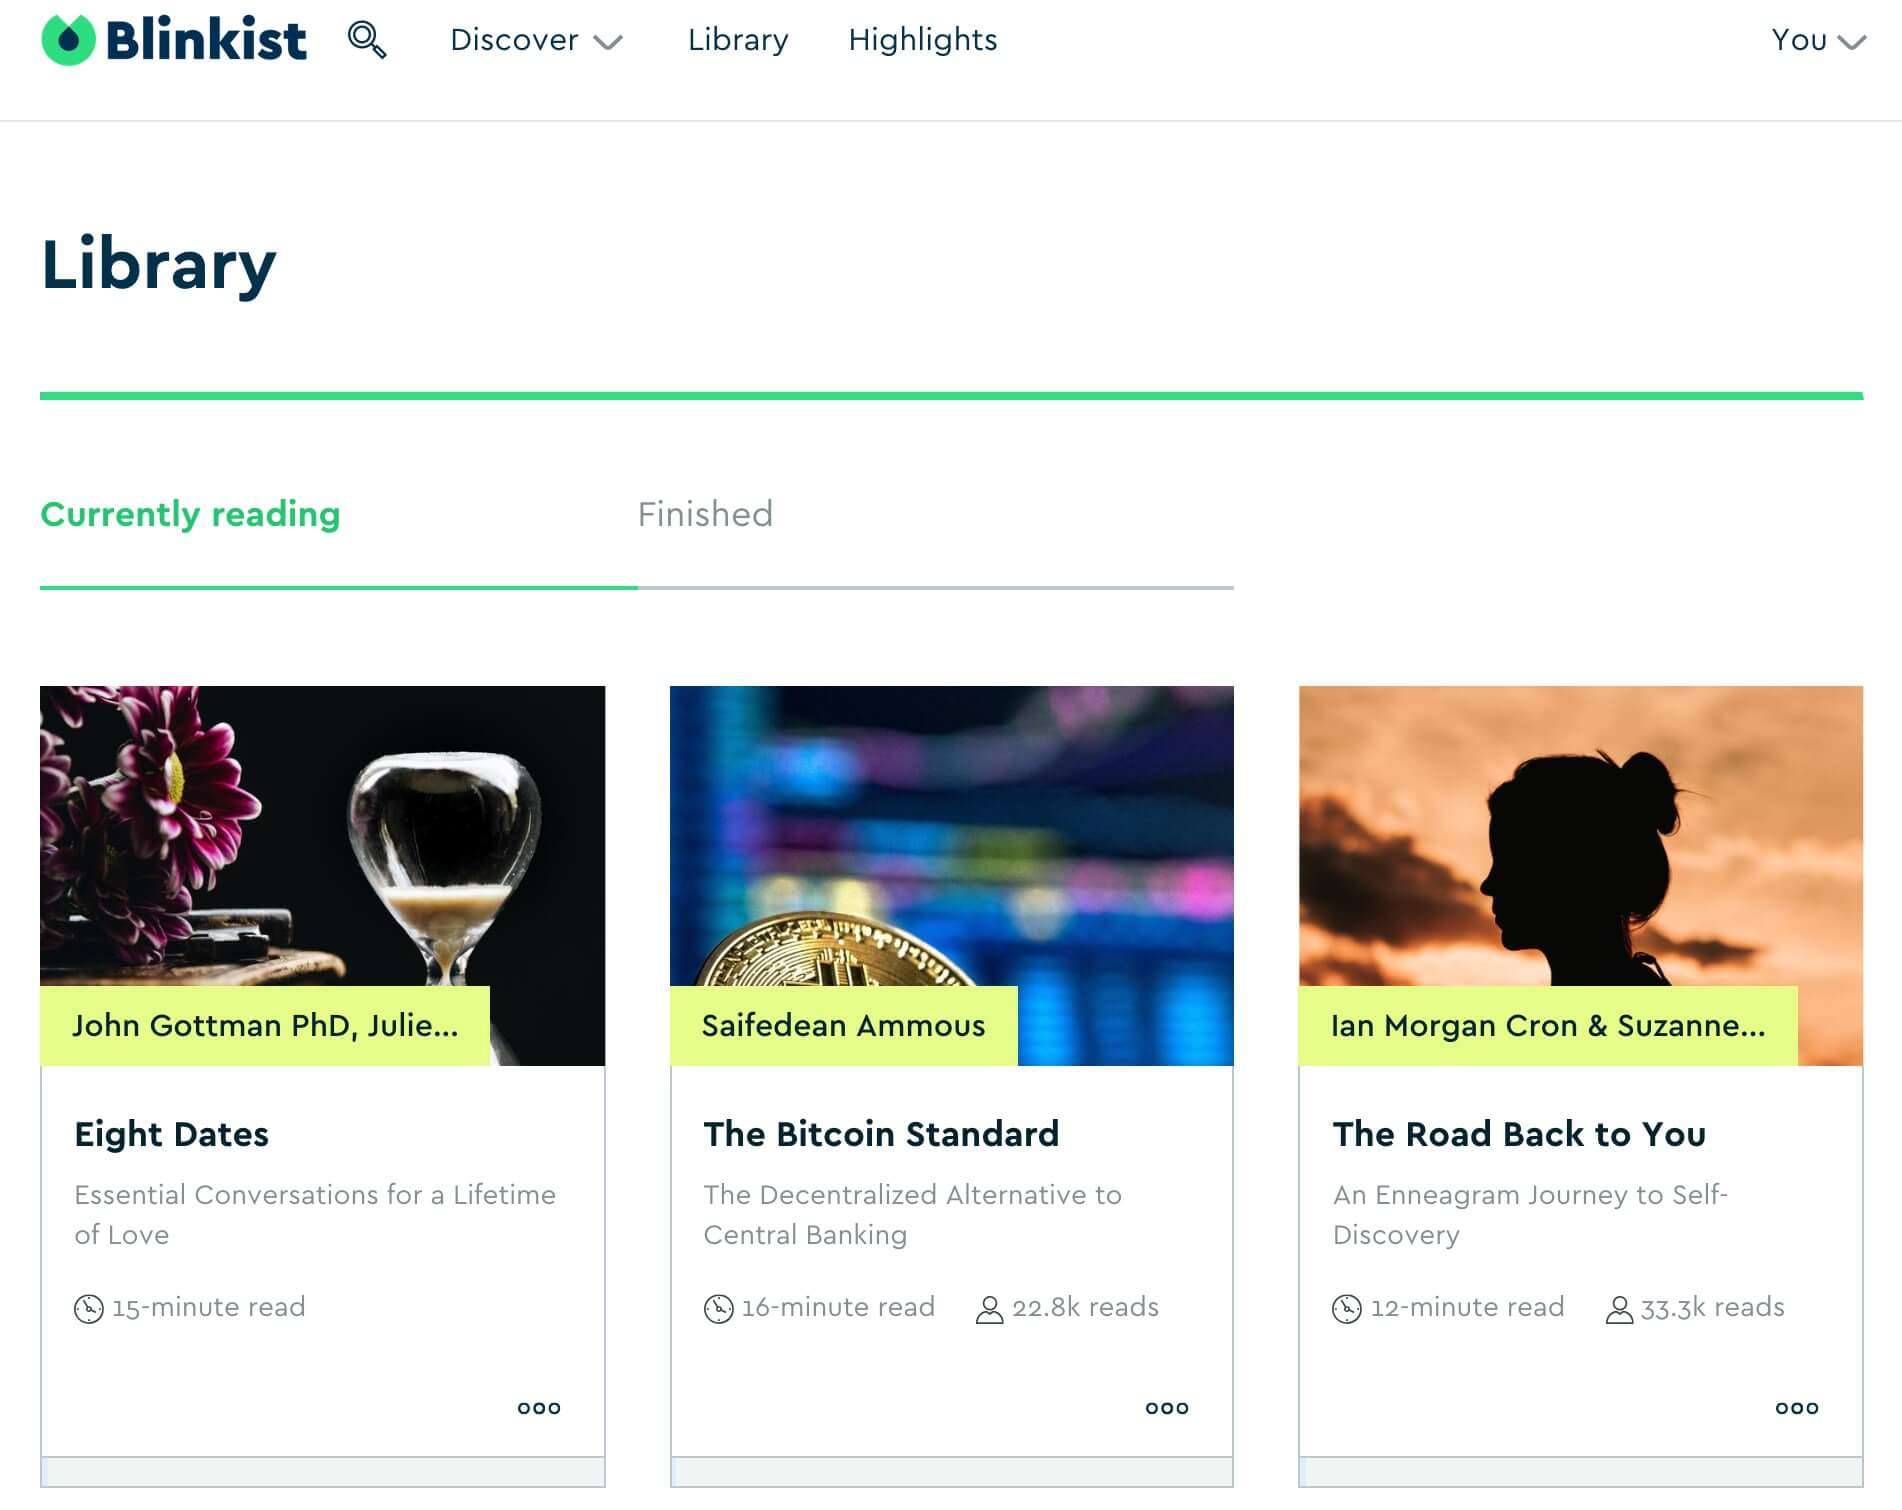 Short on Time? Get Key Insights on Popular Books and Podcasts with the Blinkist App